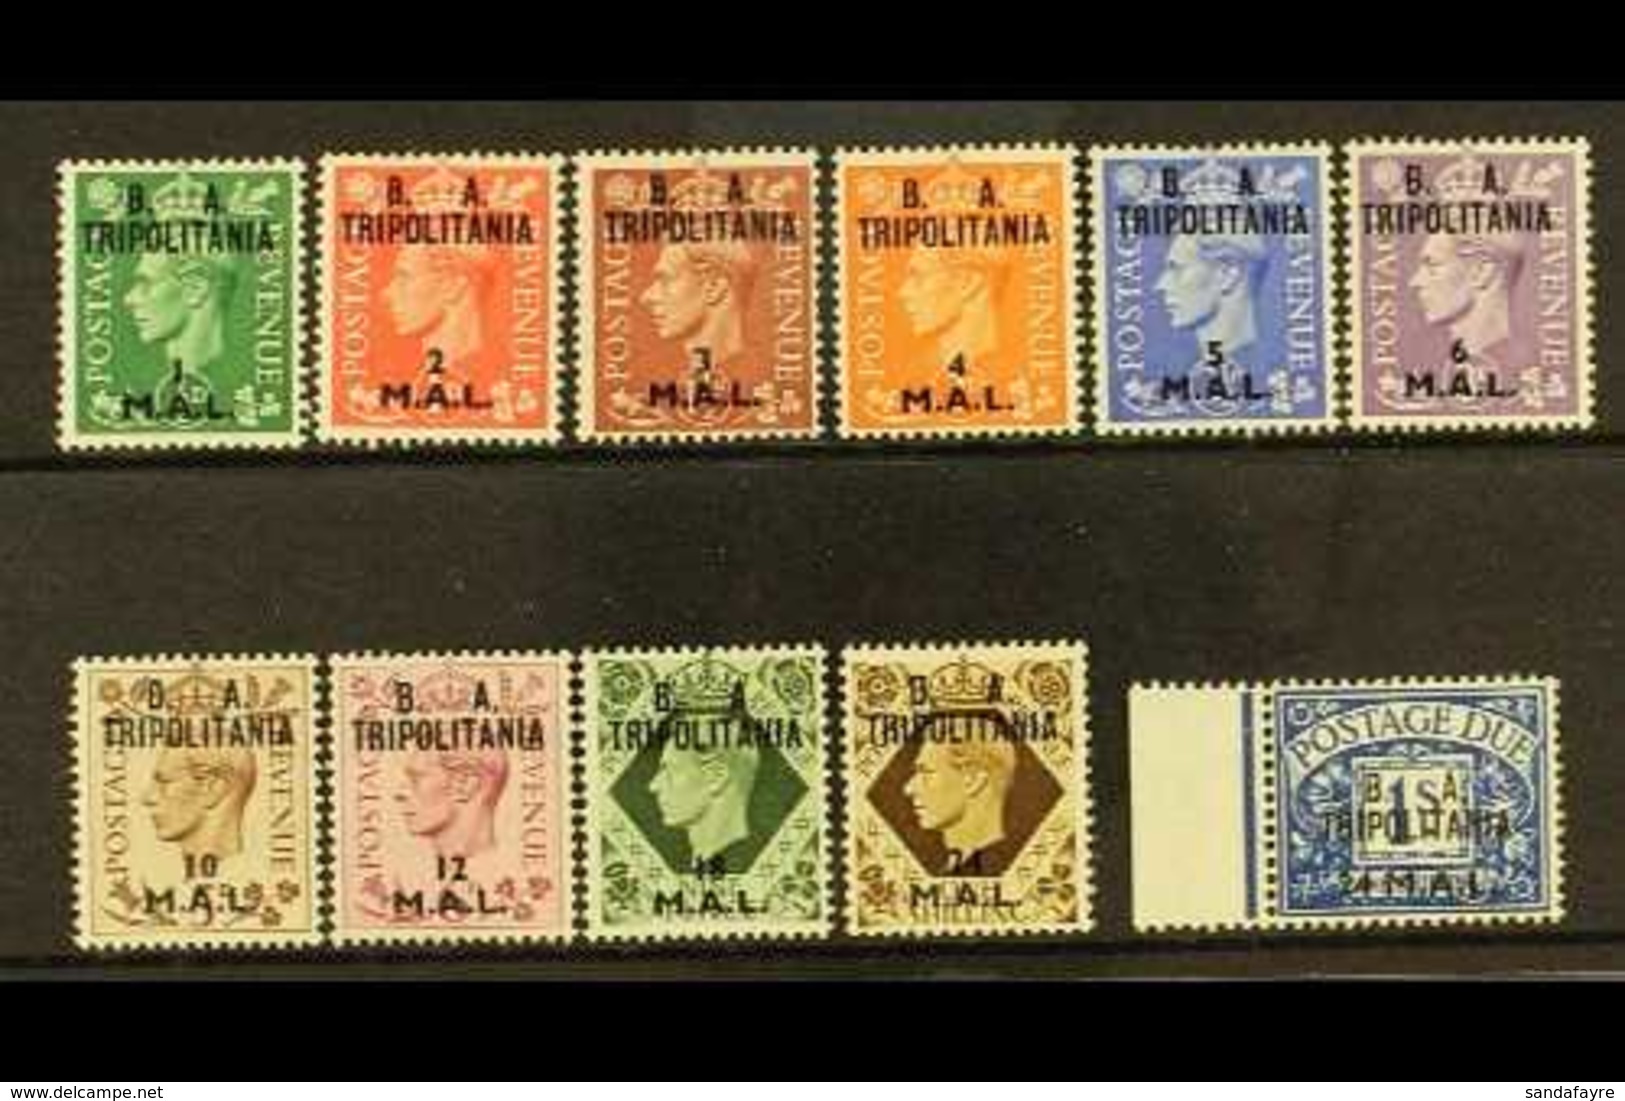 TRIPOLITANIA  1950 "B.A." Set To 24L On 1s (SG T14/23), Plus 24L On 1s Postage Due (SG TD10), Very Fine Mint. (11 Stamps - Afrique Orientale Italienne